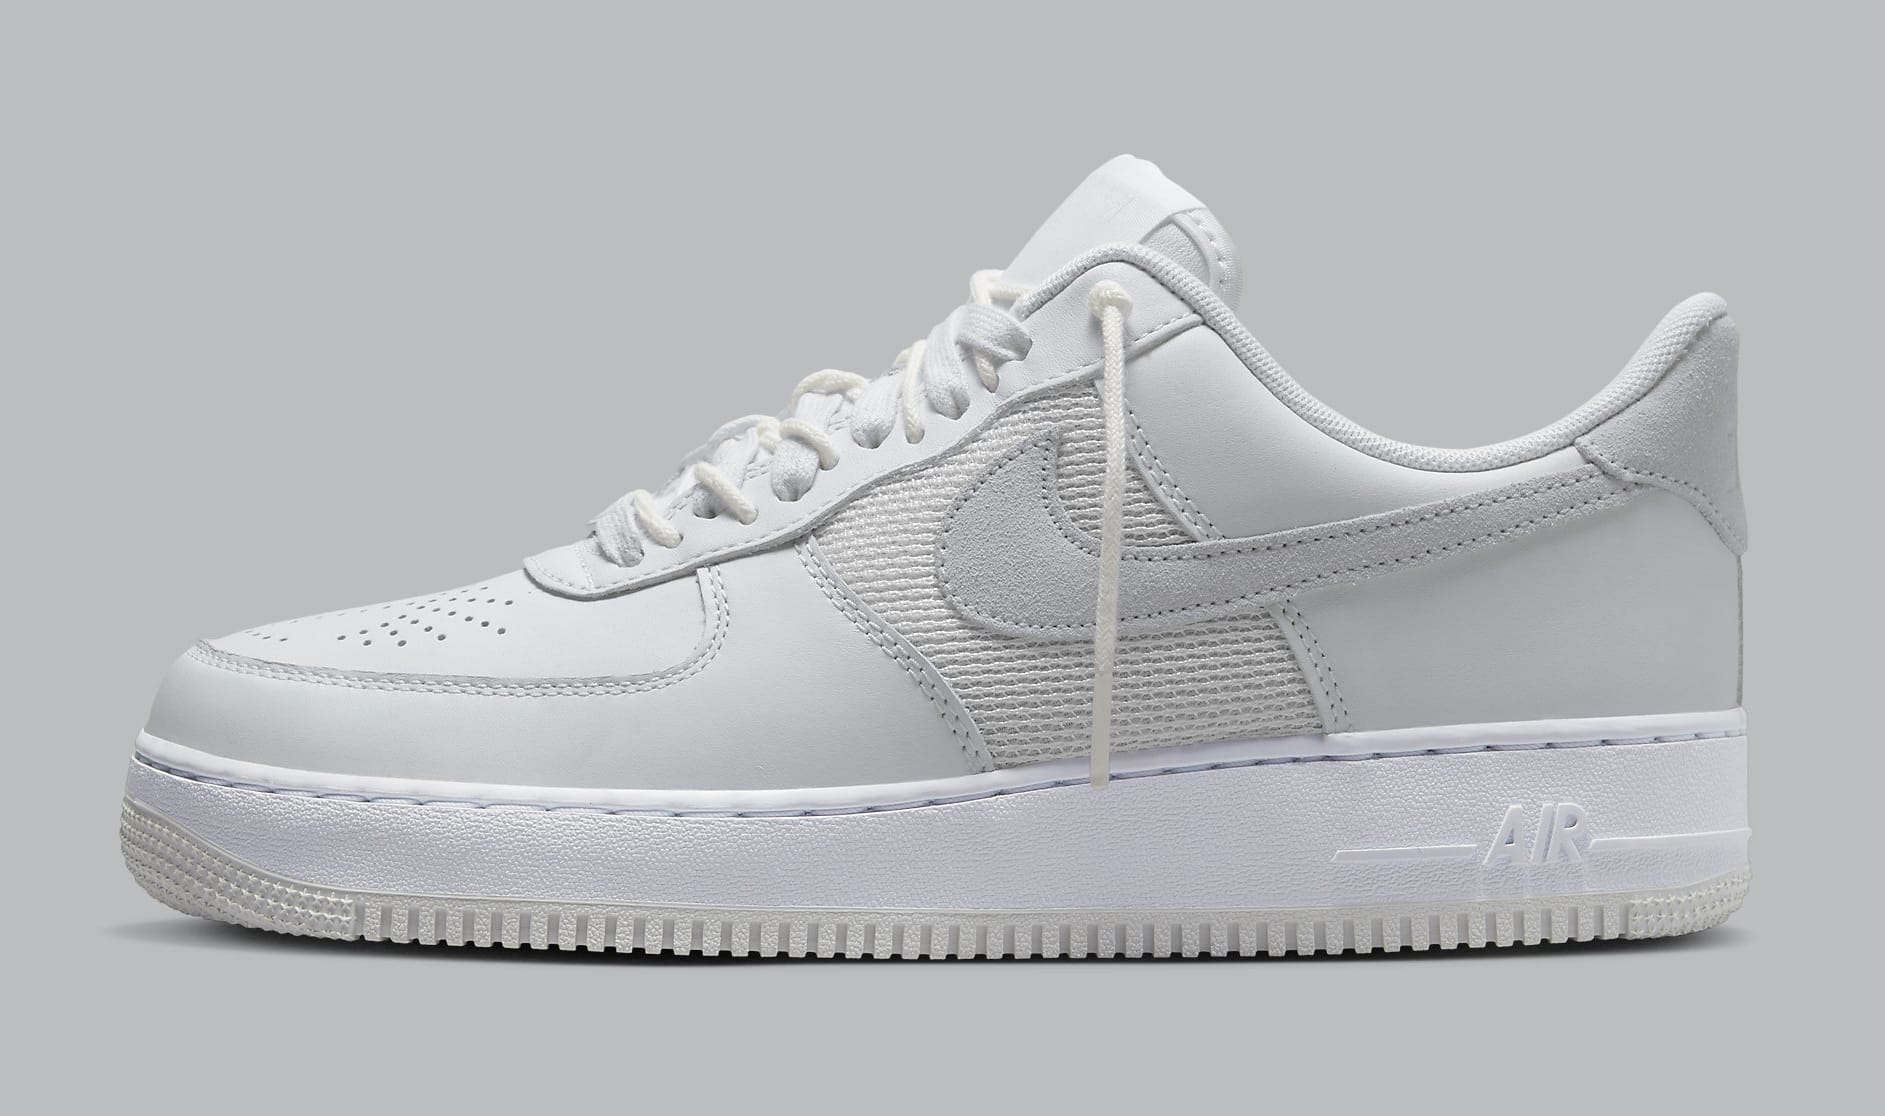 Slam Jam x Nike Air Force 1 Low 'White' DX5590 100 Lateral